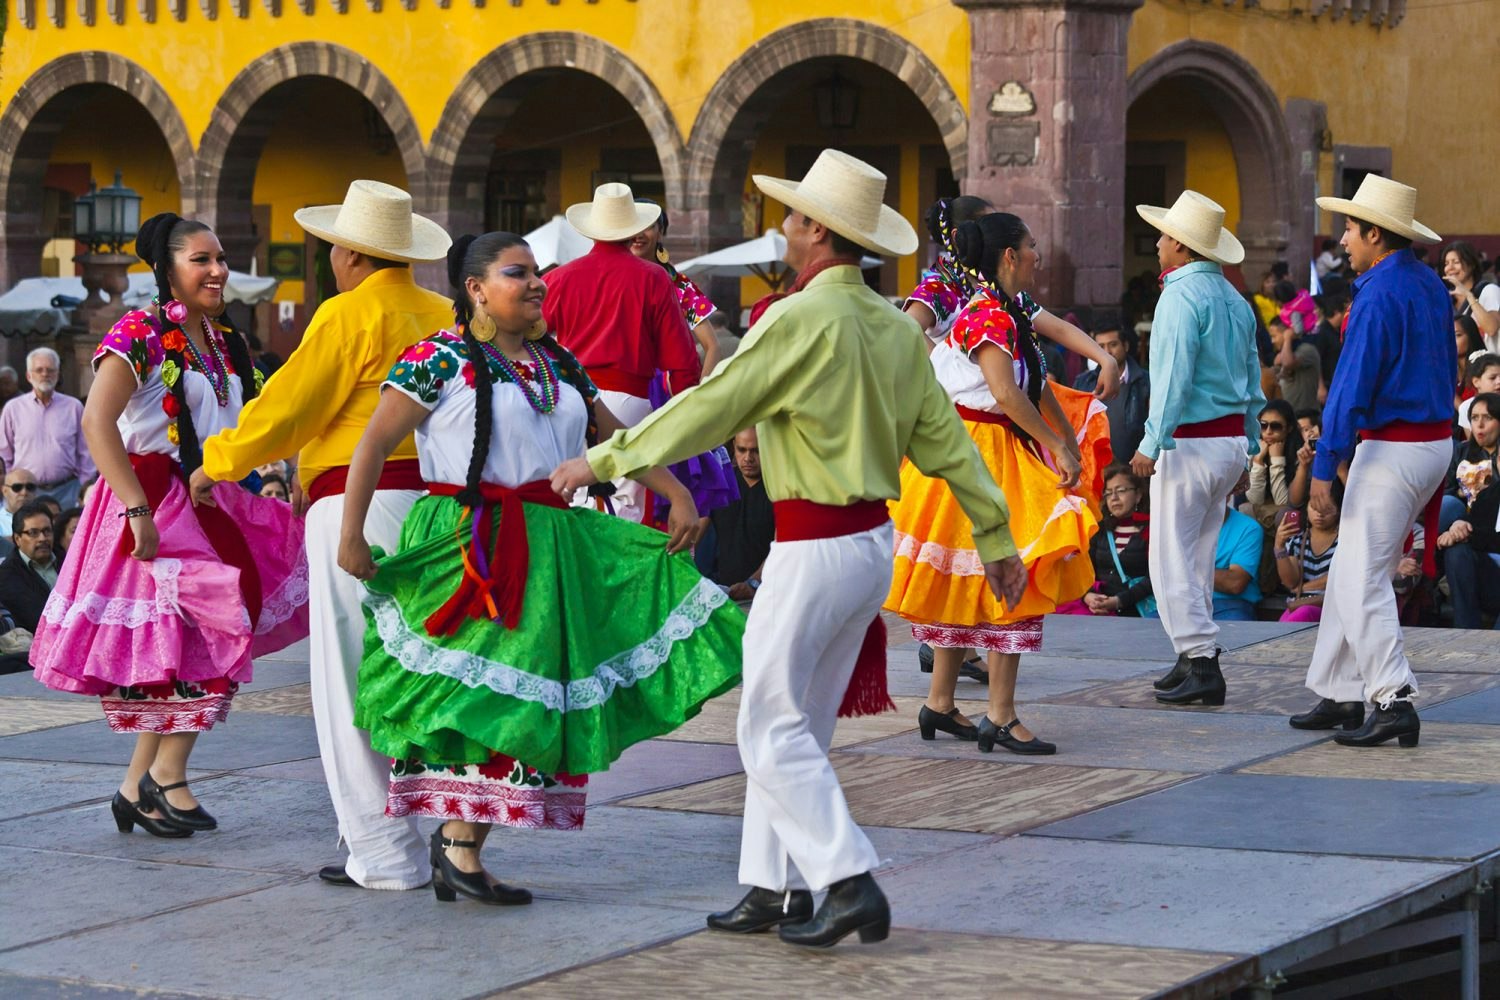 Dancers perform In the Jardin Or Central Square during the annual folk dance festival, San Miguel De Allende, Mexico